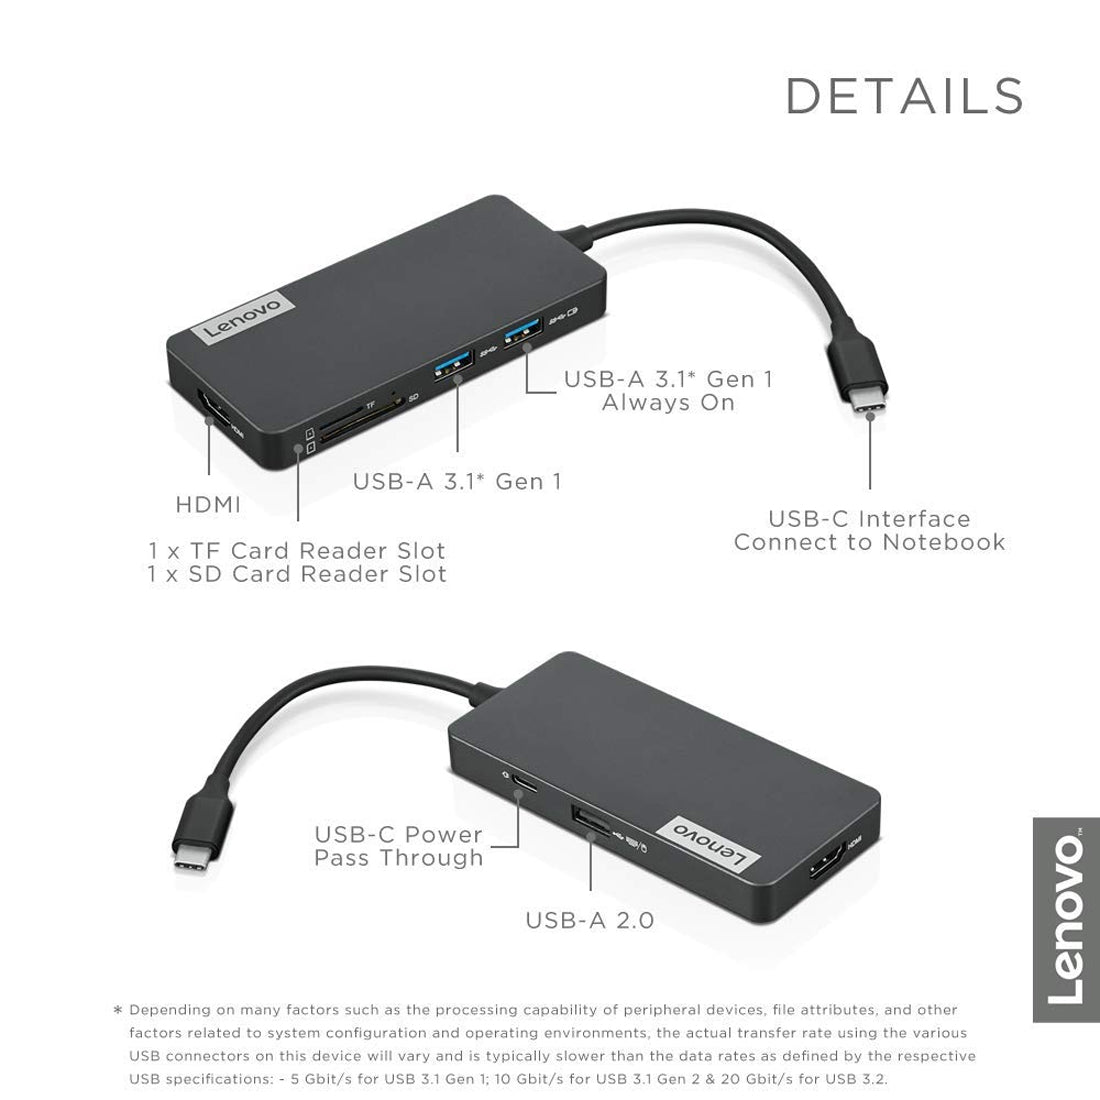 Lenovo USB Type C 7-in-1 Hub Docking Station with HDMI 1.4 and USB 3.0